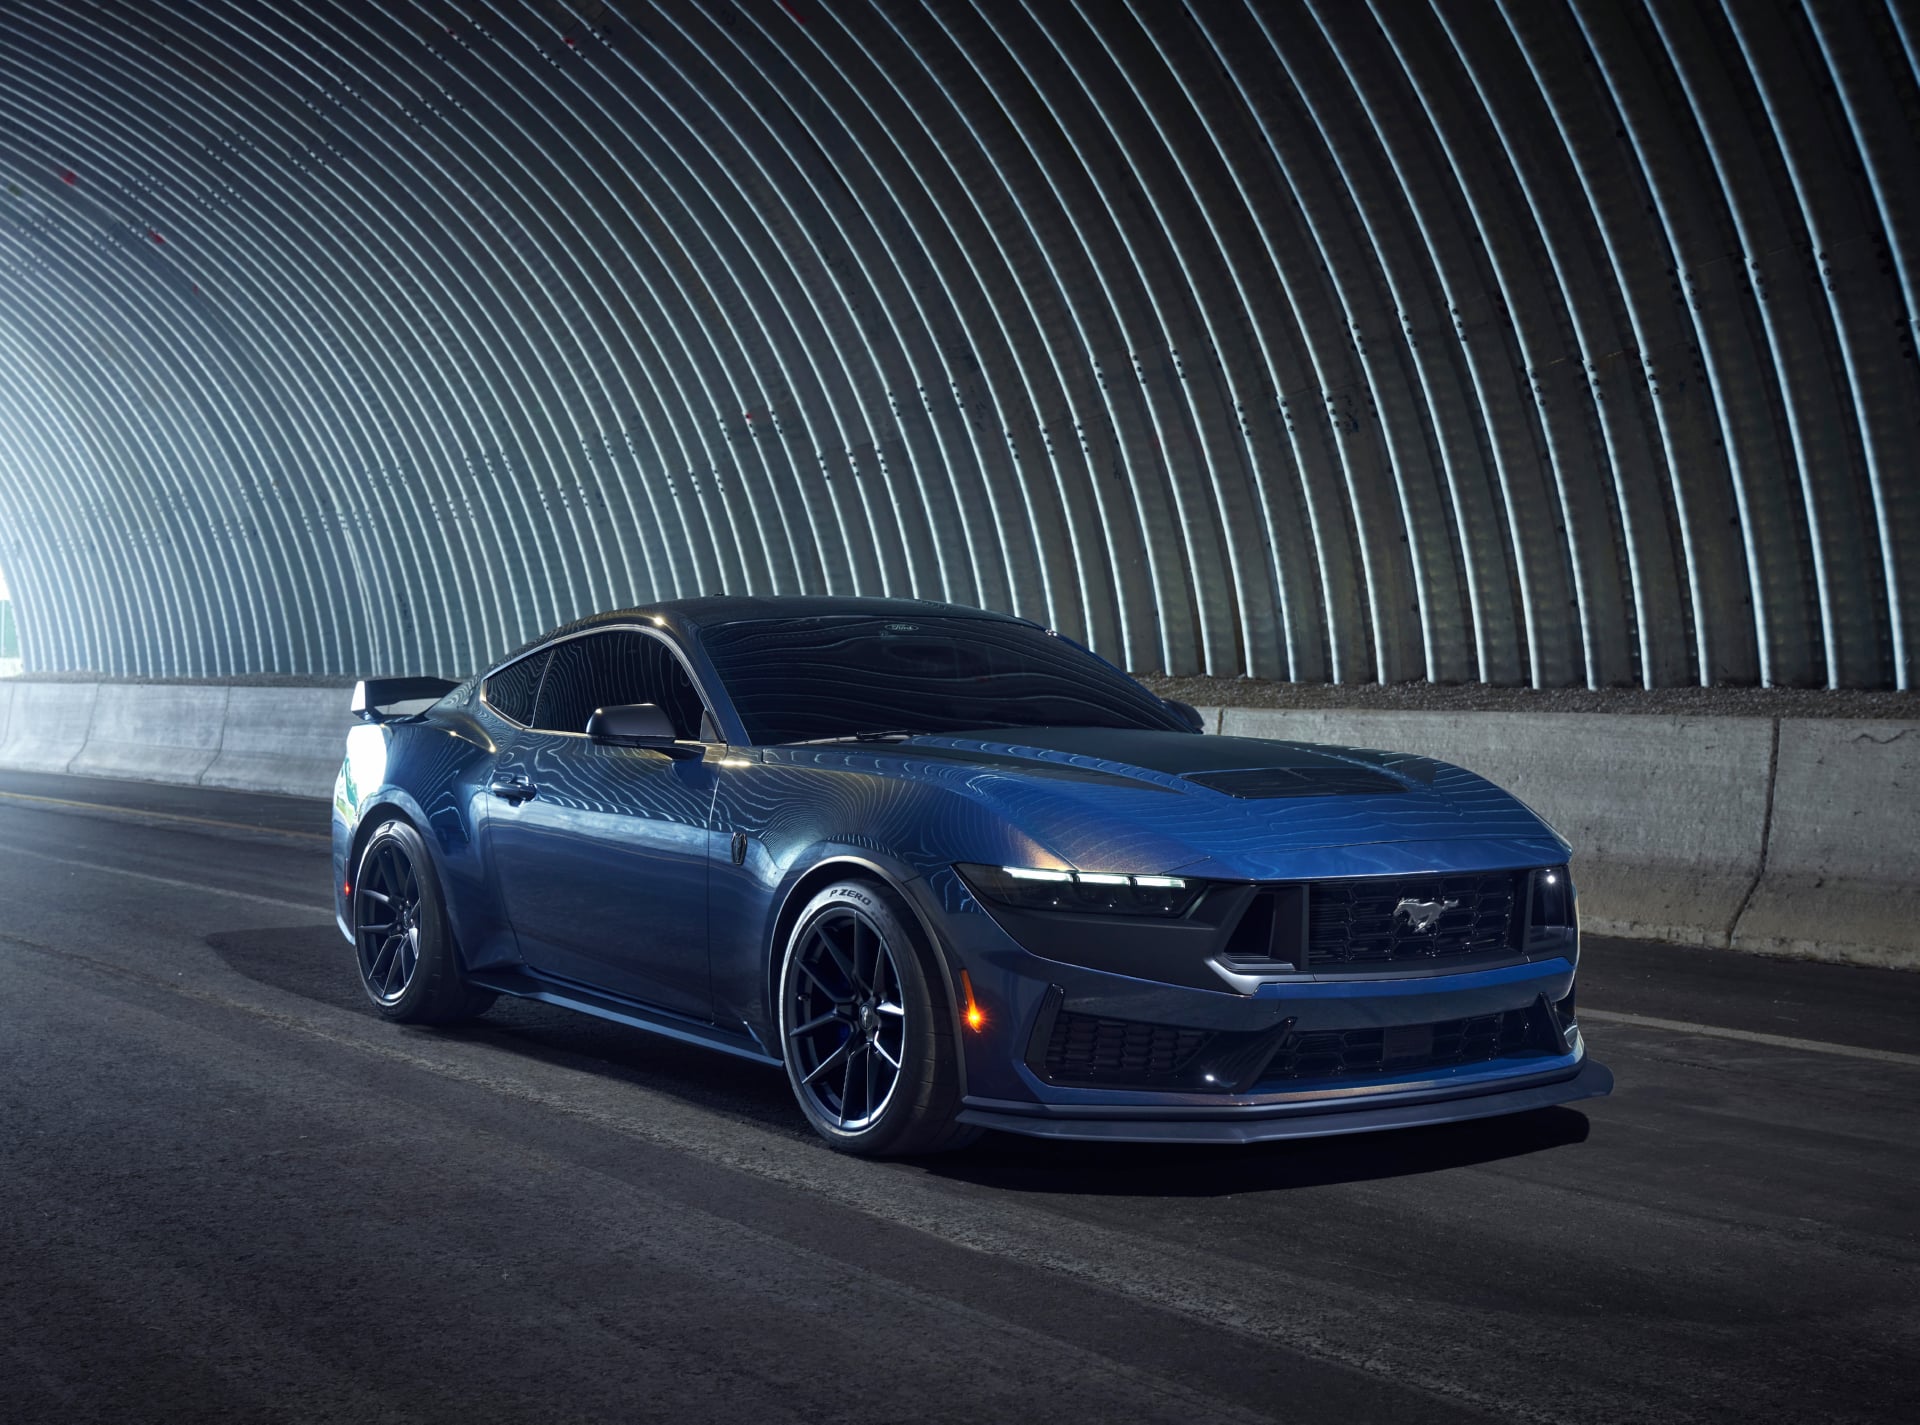 Ford Mustang Dark Horse wallpapers HD quality